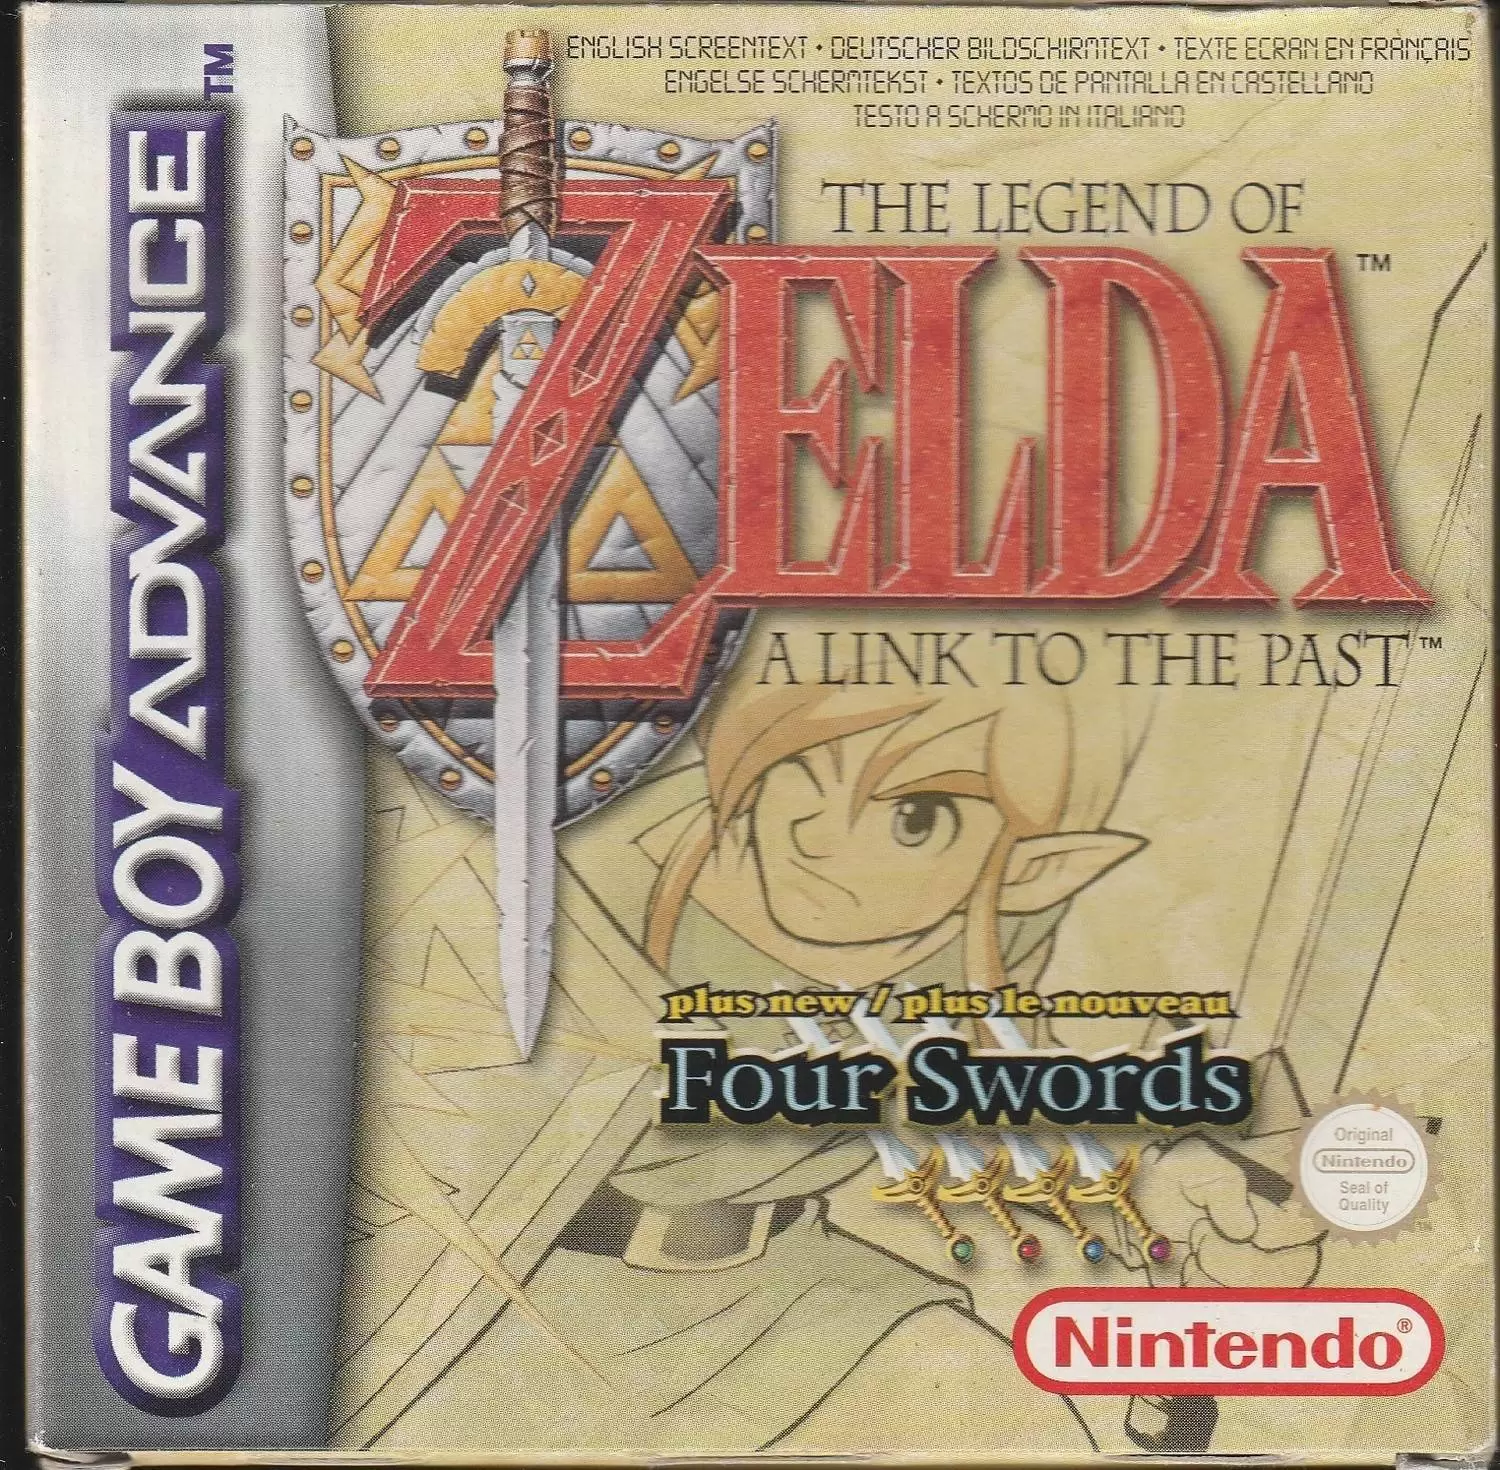 Game Boy Advance Games - The Legend of Zelda : A Link to the Past - Four Swords